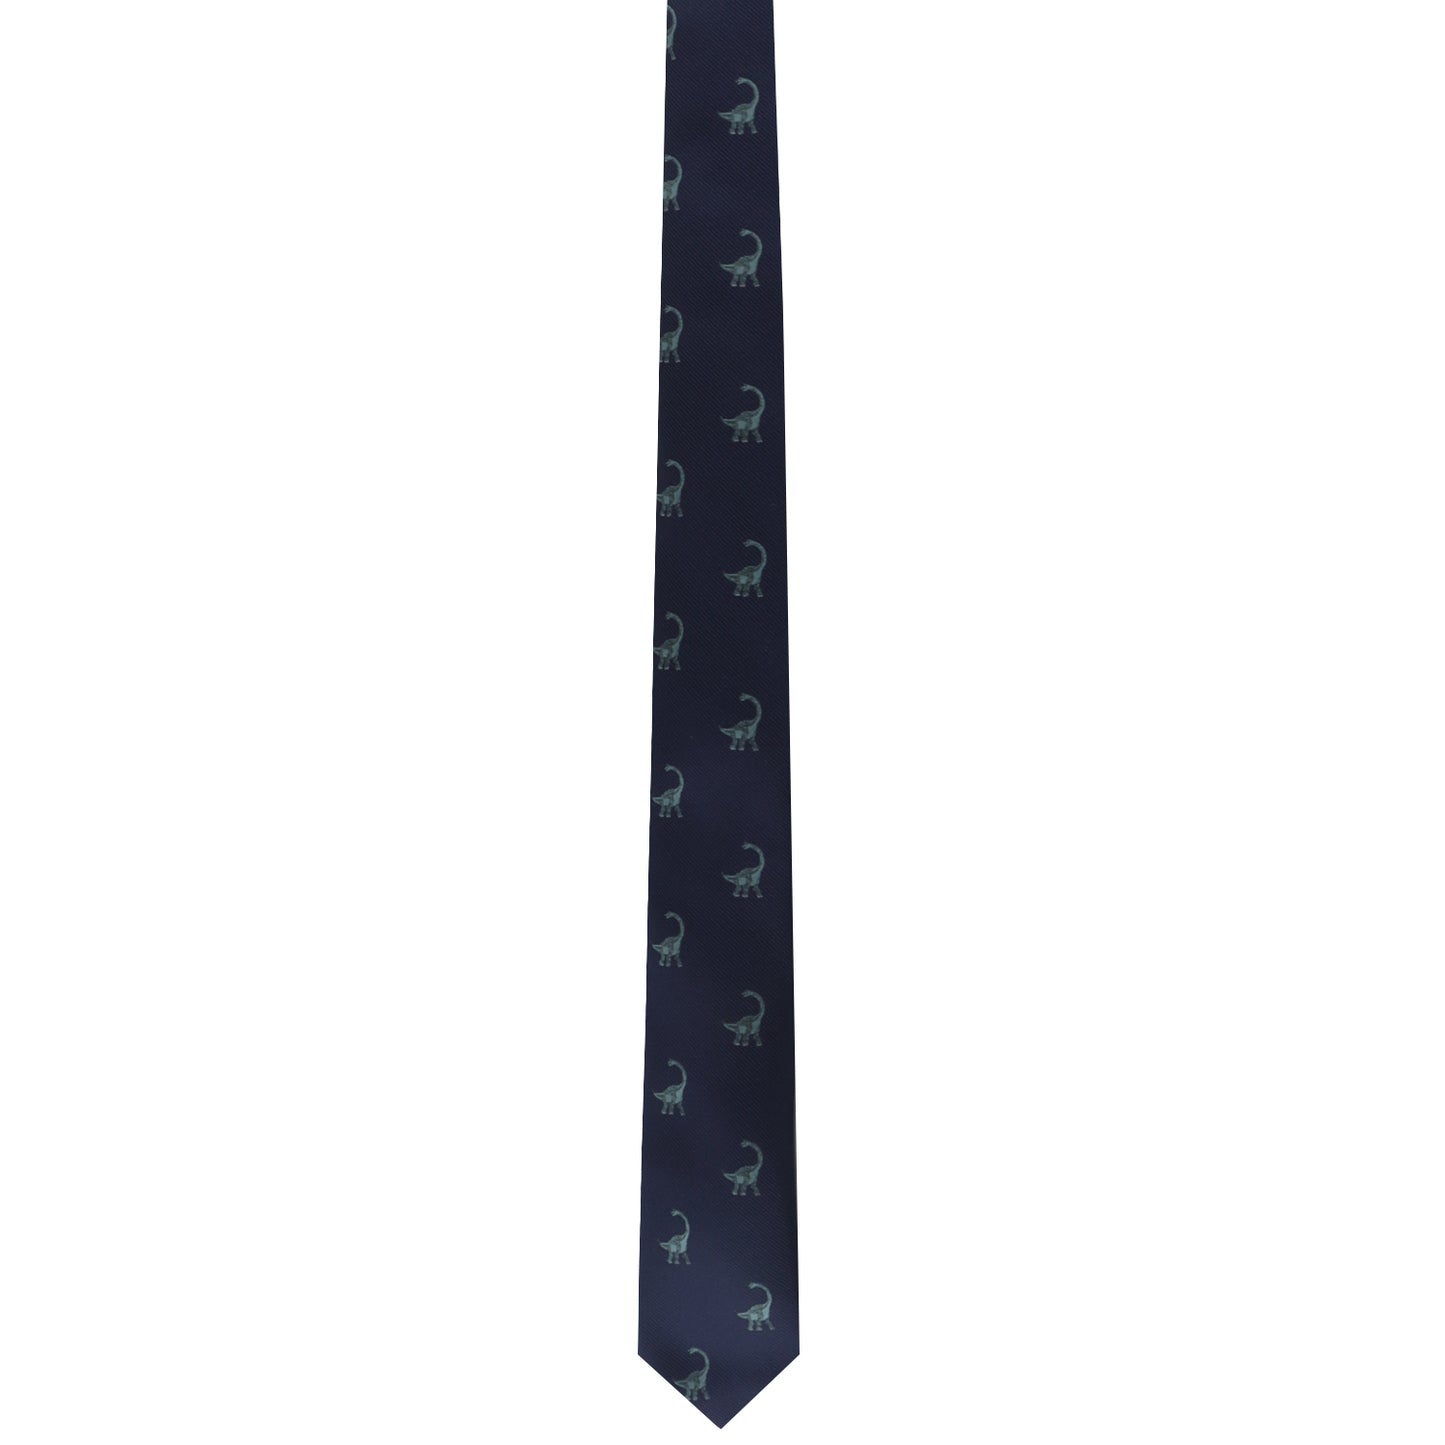 A Brontosaurus Skinny Tie with a touch of dino elegance.